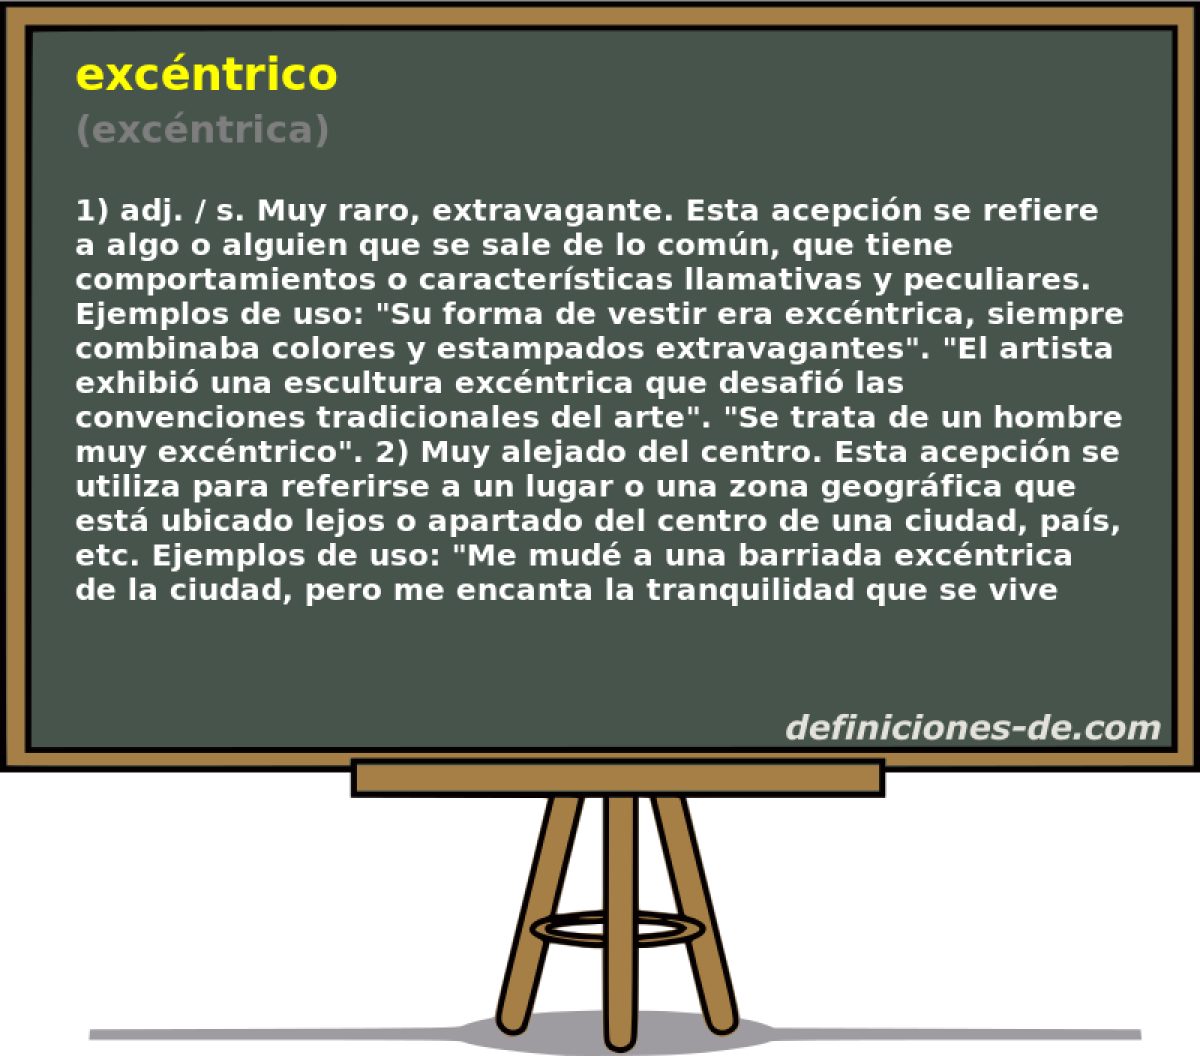 excntrico (excntrica)